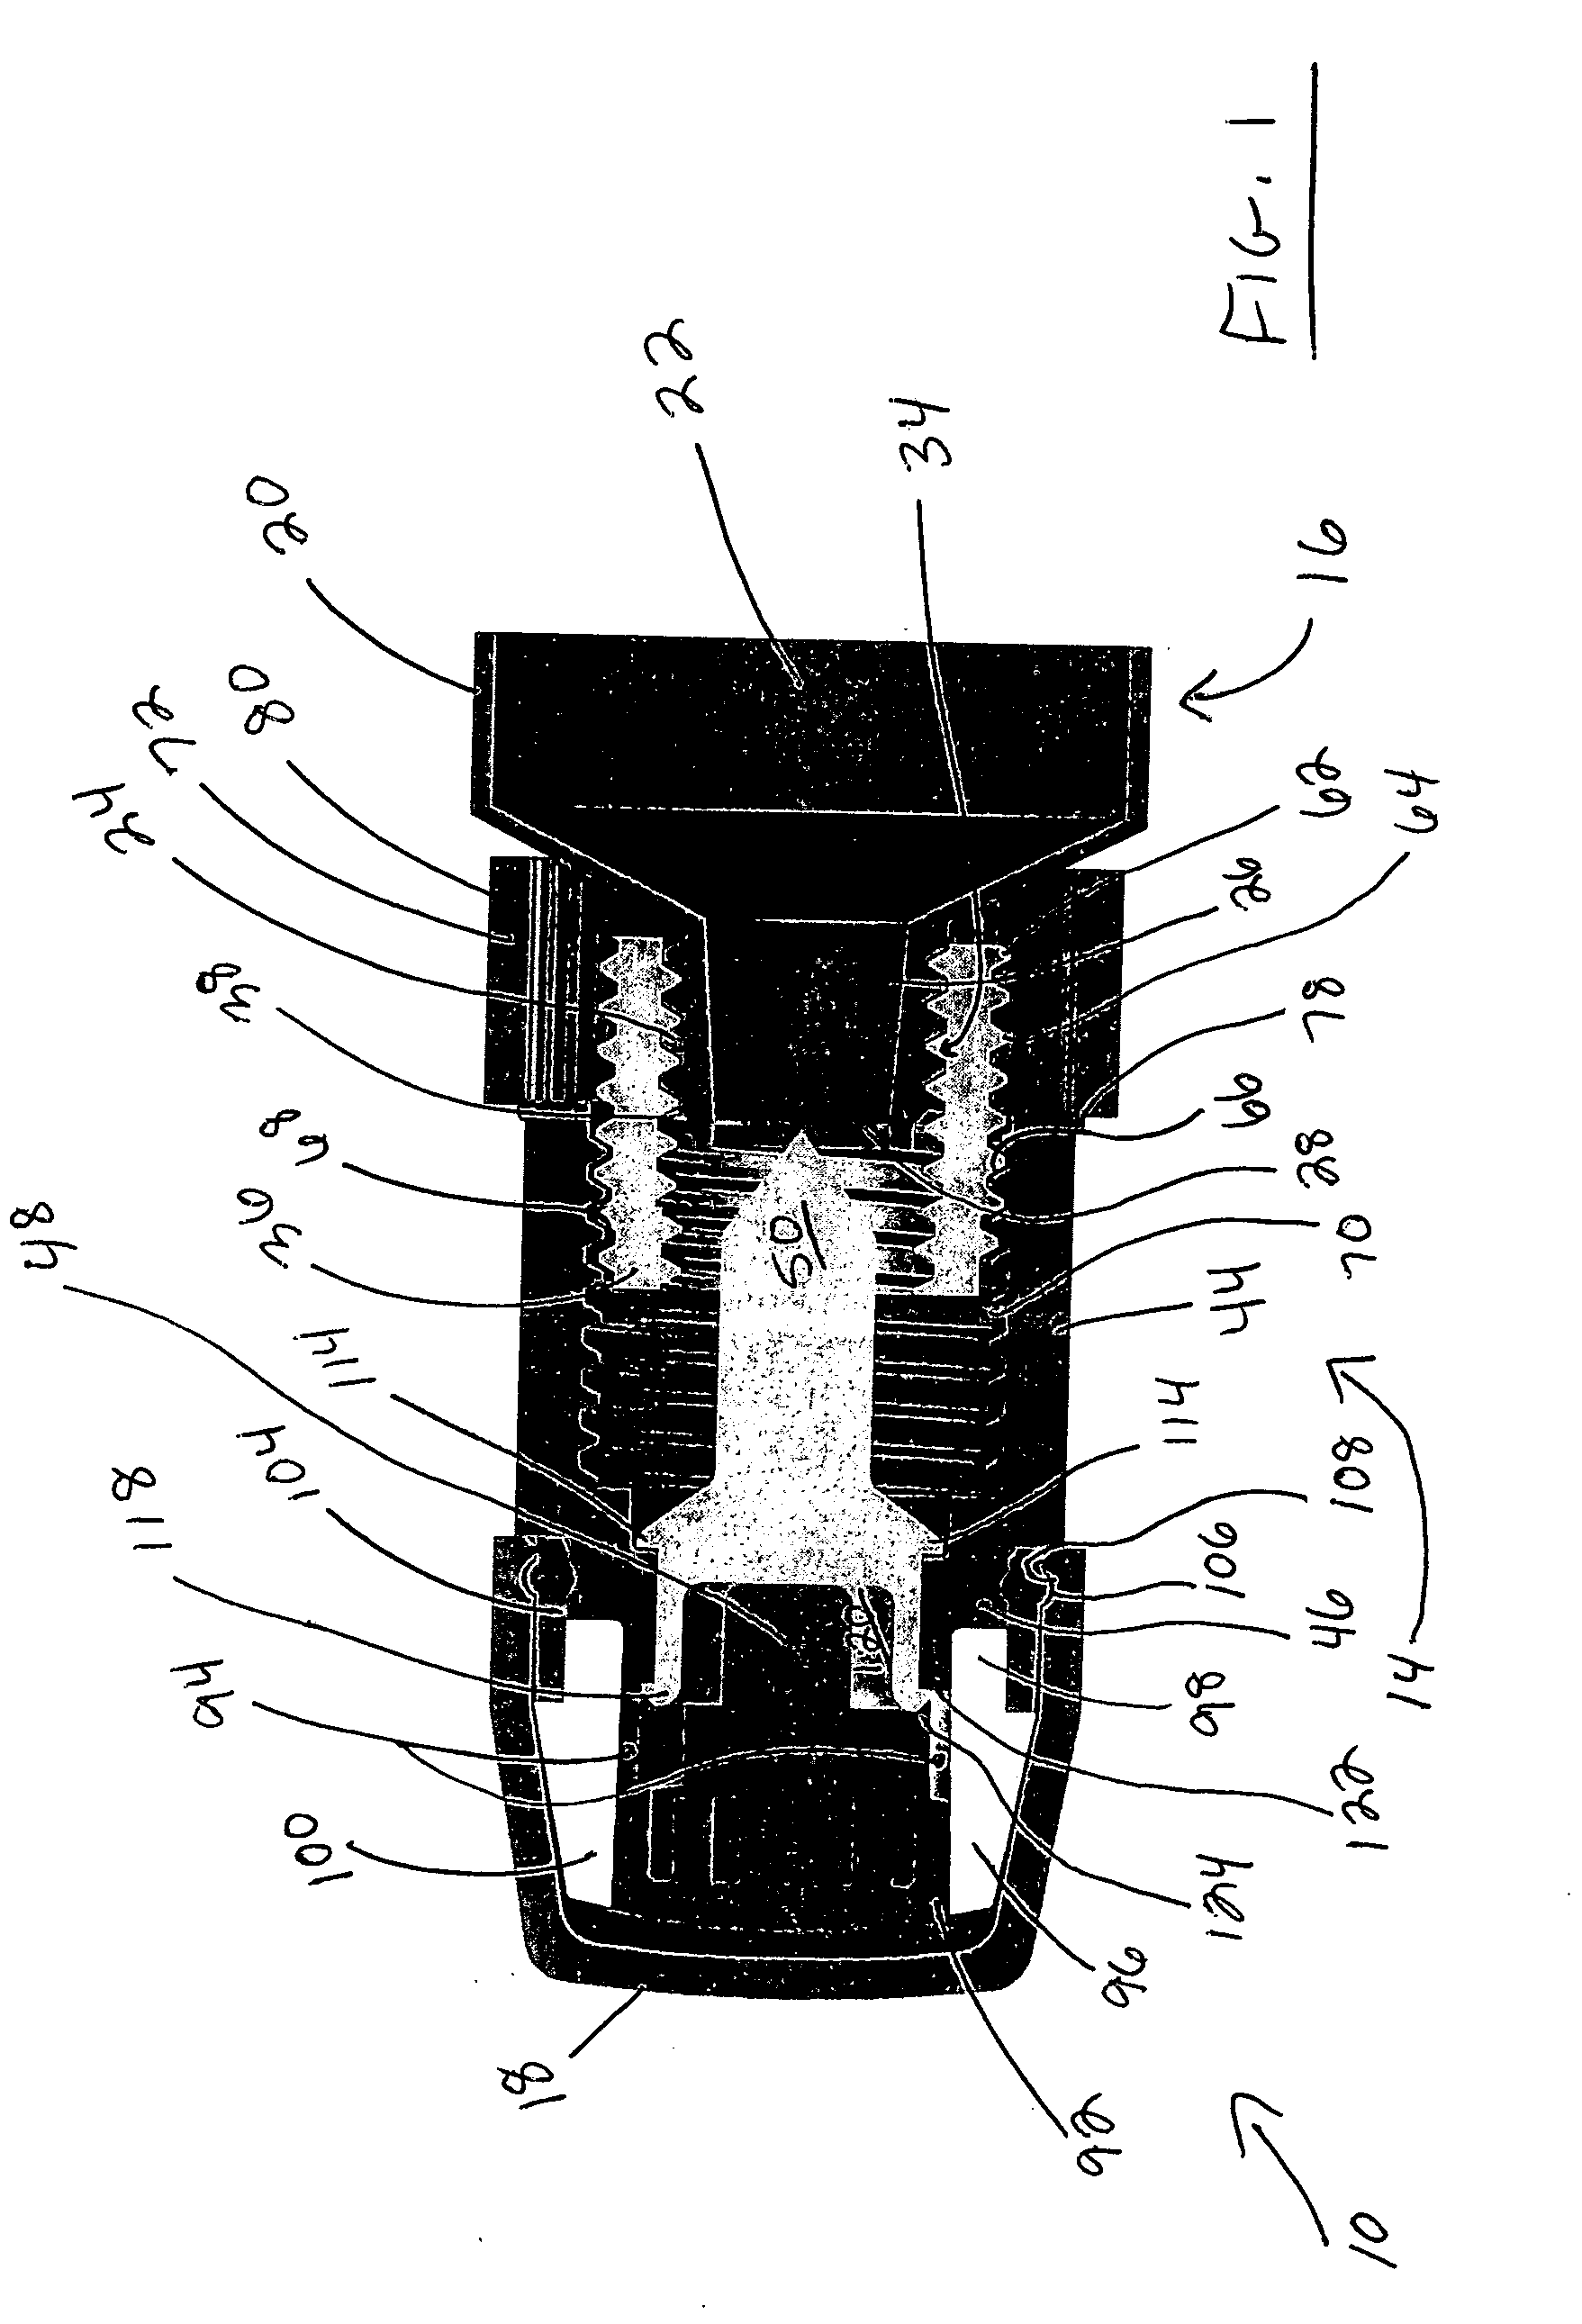 Container and one-way valve assembly for strong and dispensing substances, and related method